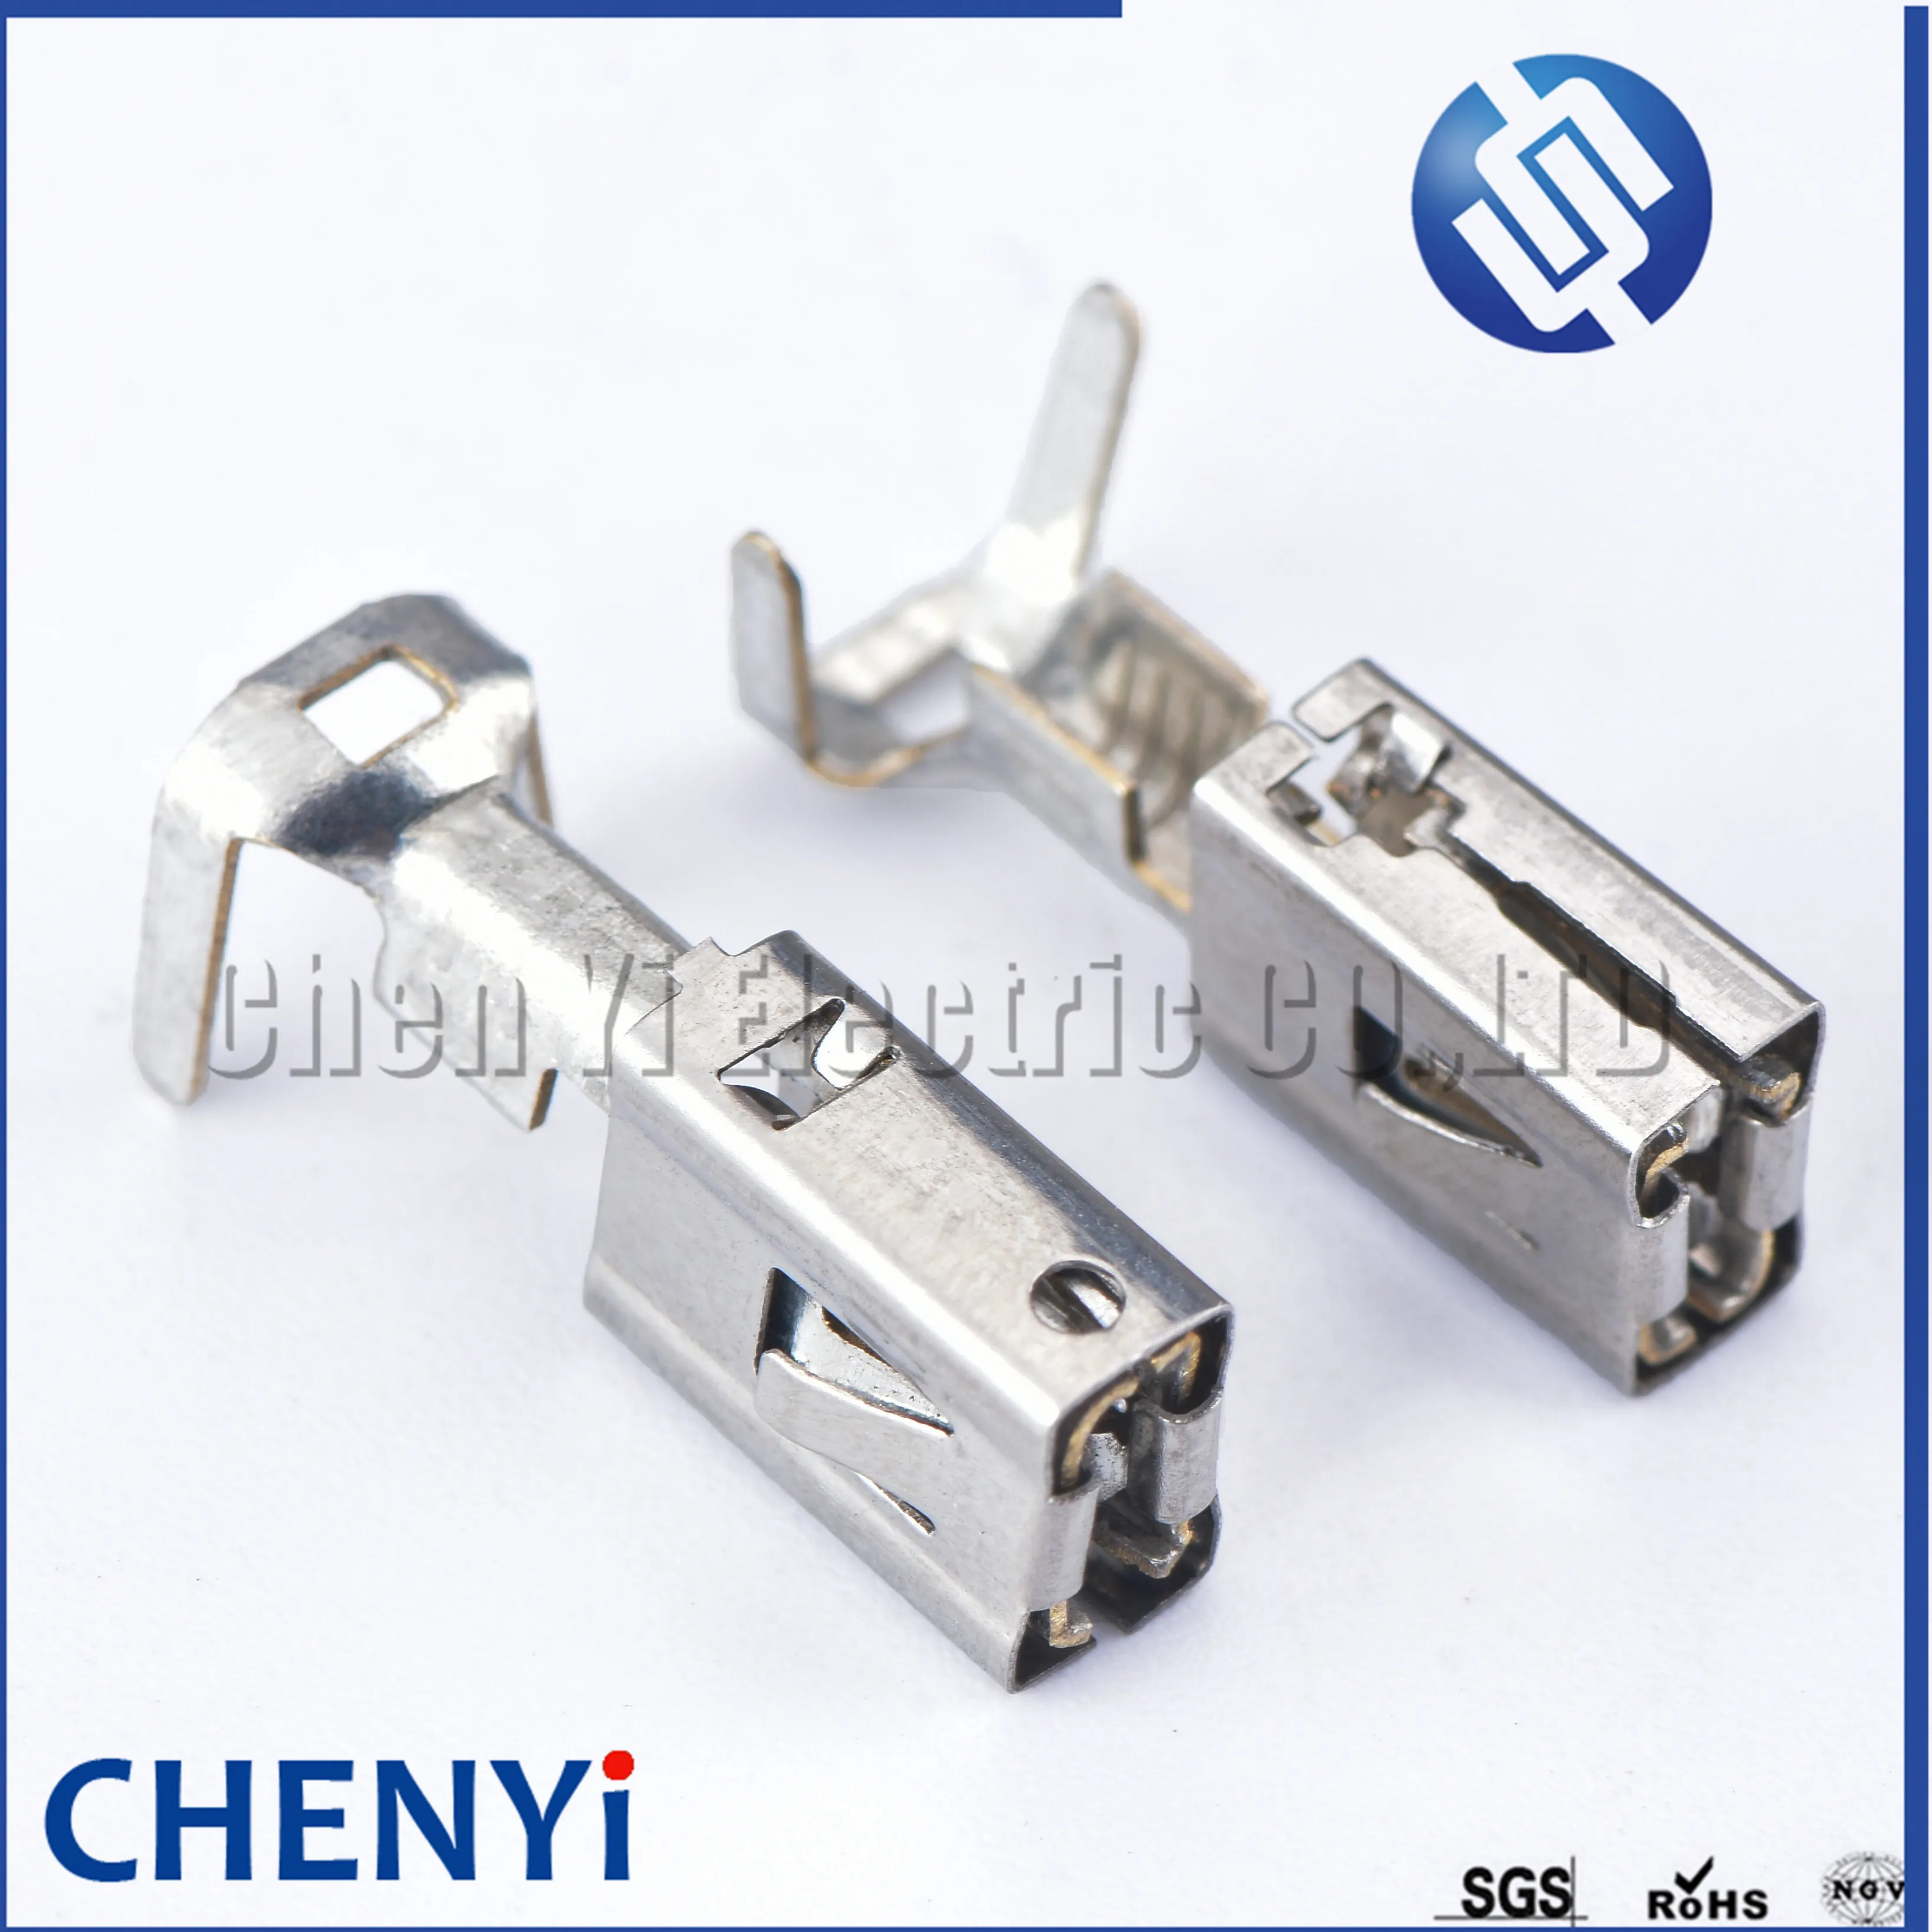 

20 Pcs 6.3 MM Auto Crimp Wire Terminal Loose Car Elcetrical Connector Mental Pins G394 Tinned Copper Big Square Terminal